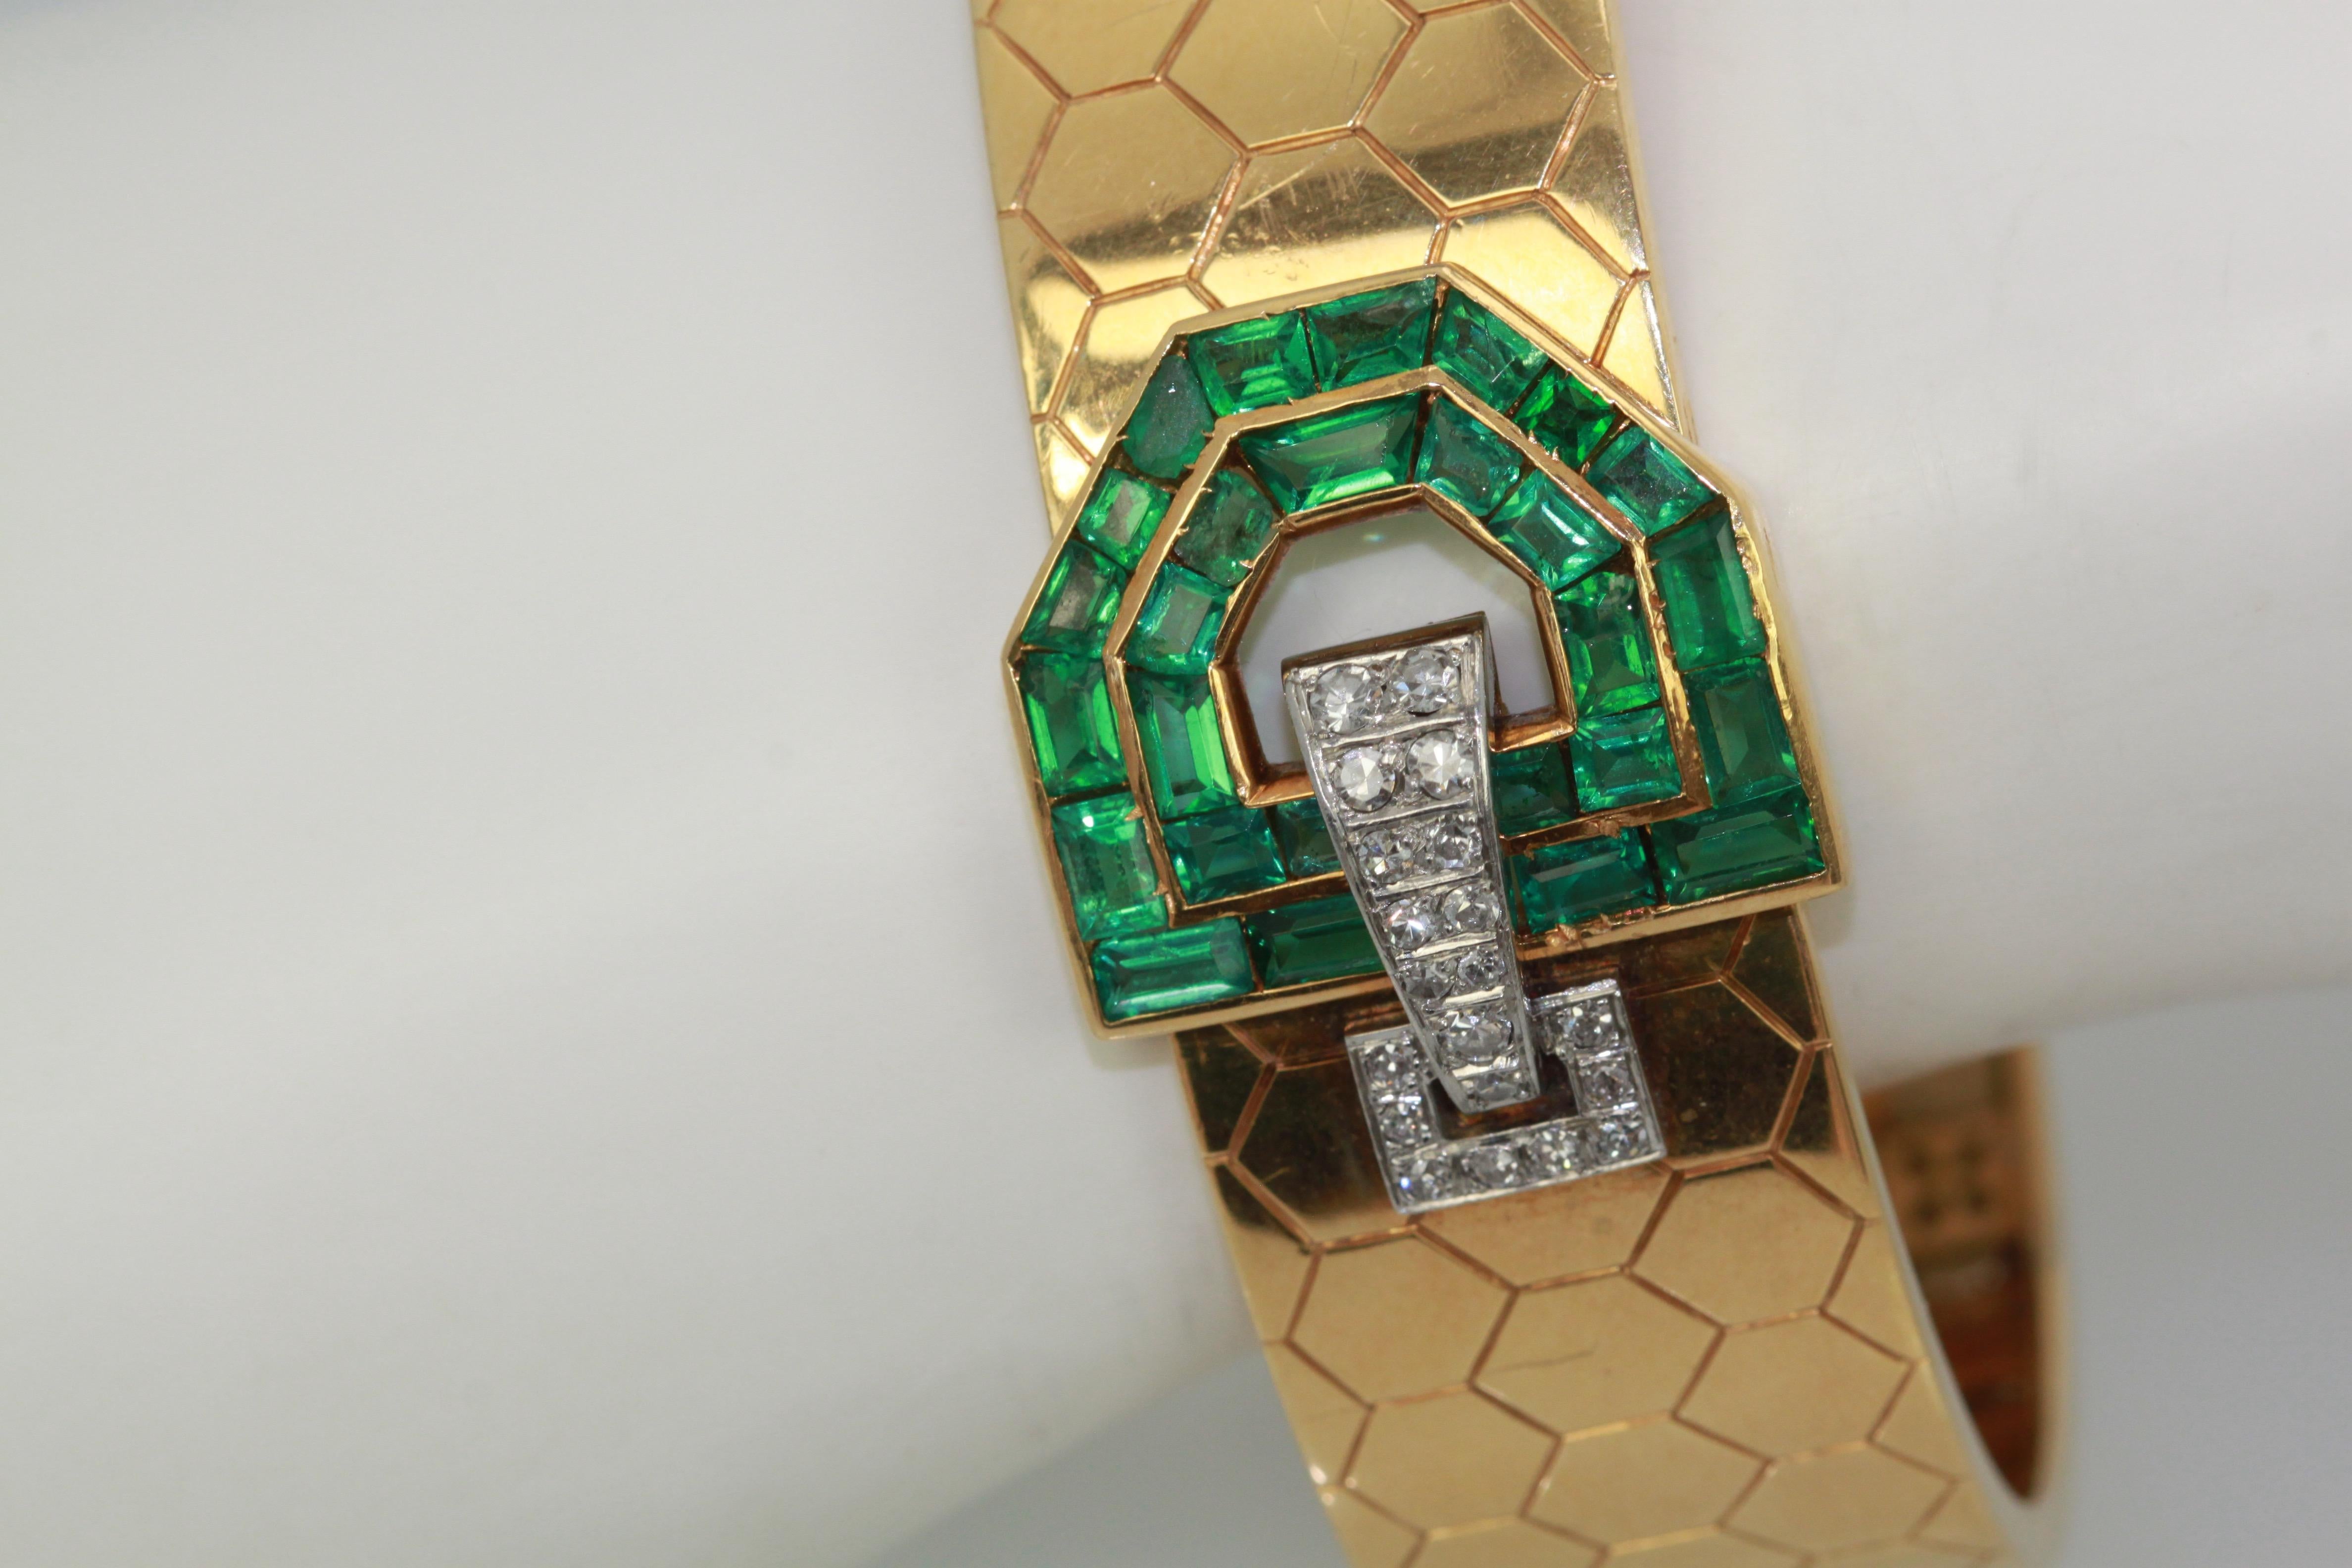 This Honeycomb Bracelet is set with Emeralds and Diamonds in a buckle style.  This comes from Austria and boosts 30 Baguette Emeralds totalling approximately 4 carats and 20 Diamonds in a lovely bracelet.  This fits a size 6 1/2 and the weight is